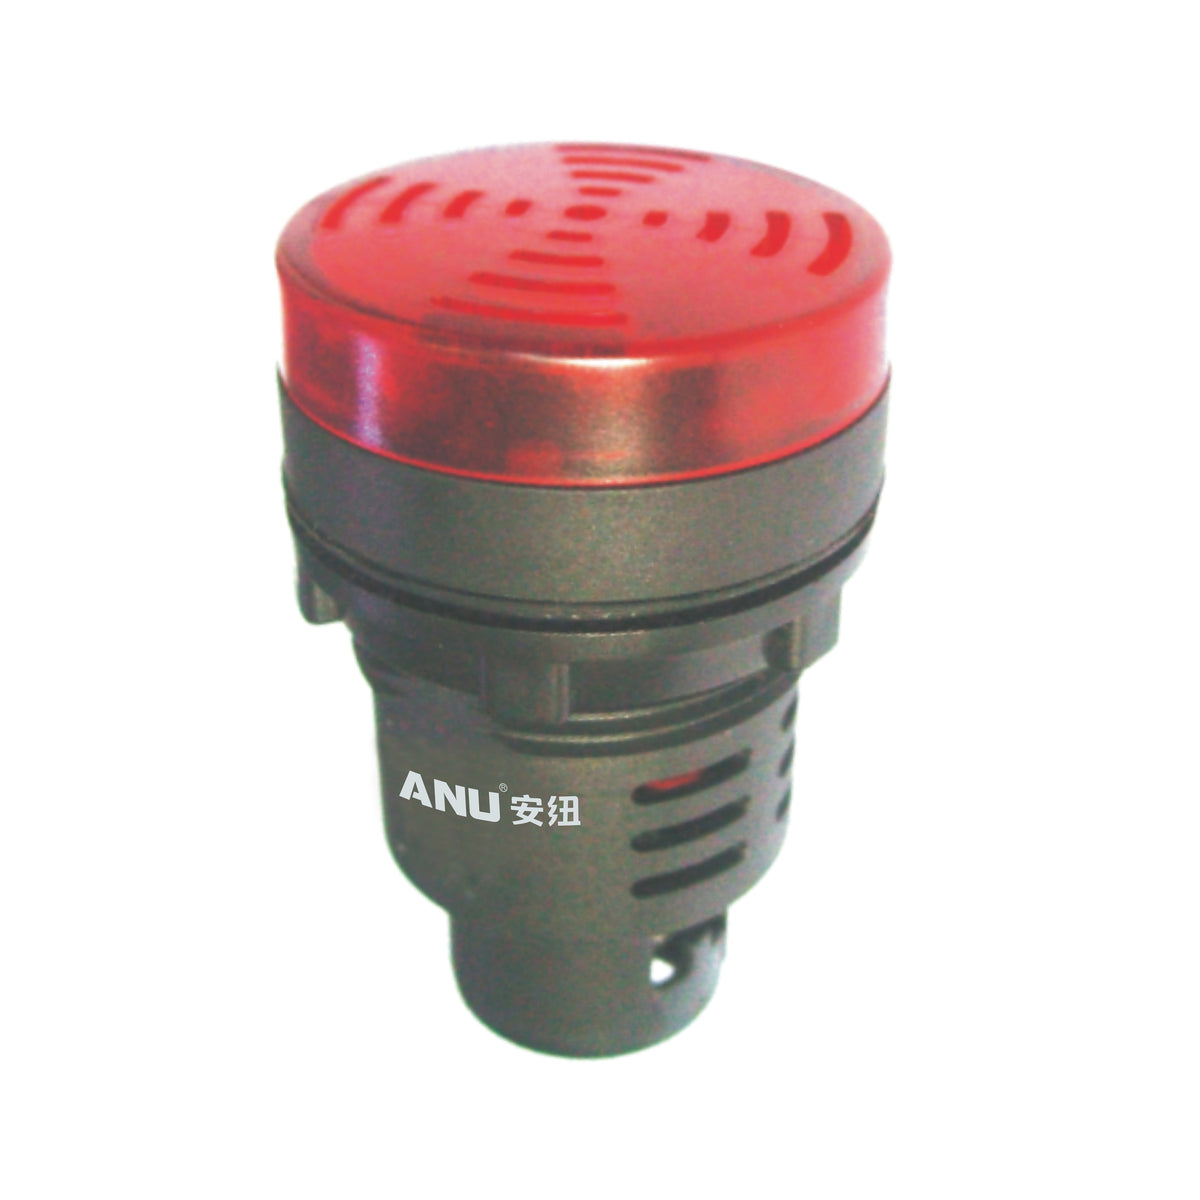 30mm Buzzer with Flashing Black Shell Short Version Red